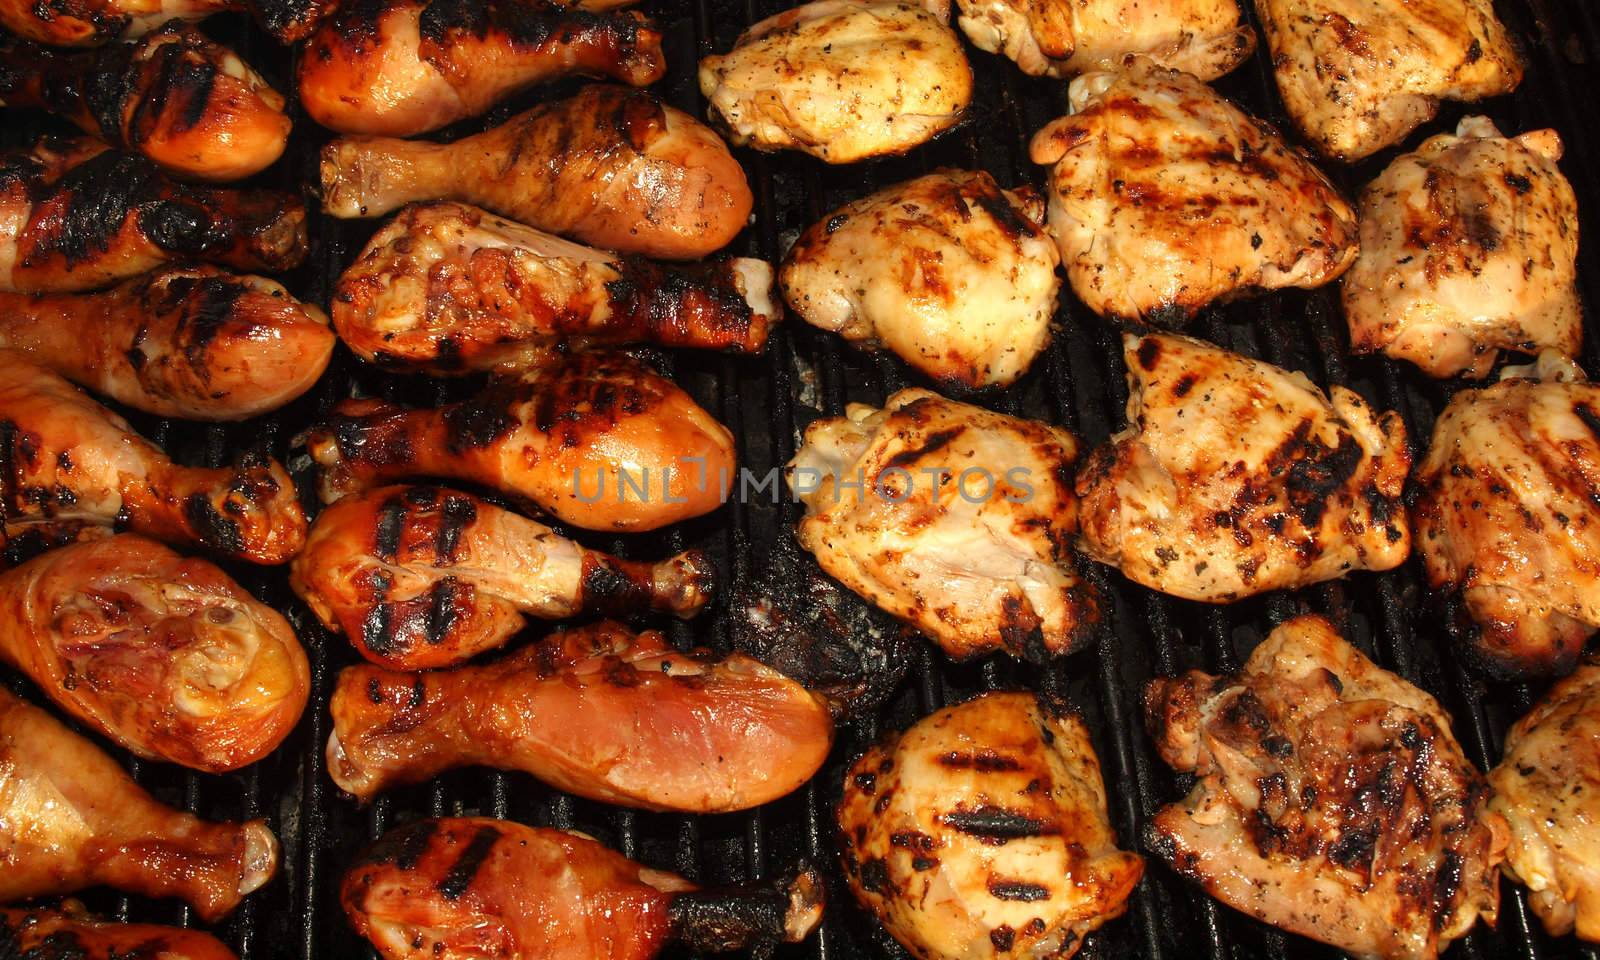 Fresh Grilled Chicken Cooking on the Barbecue by Frankljunior